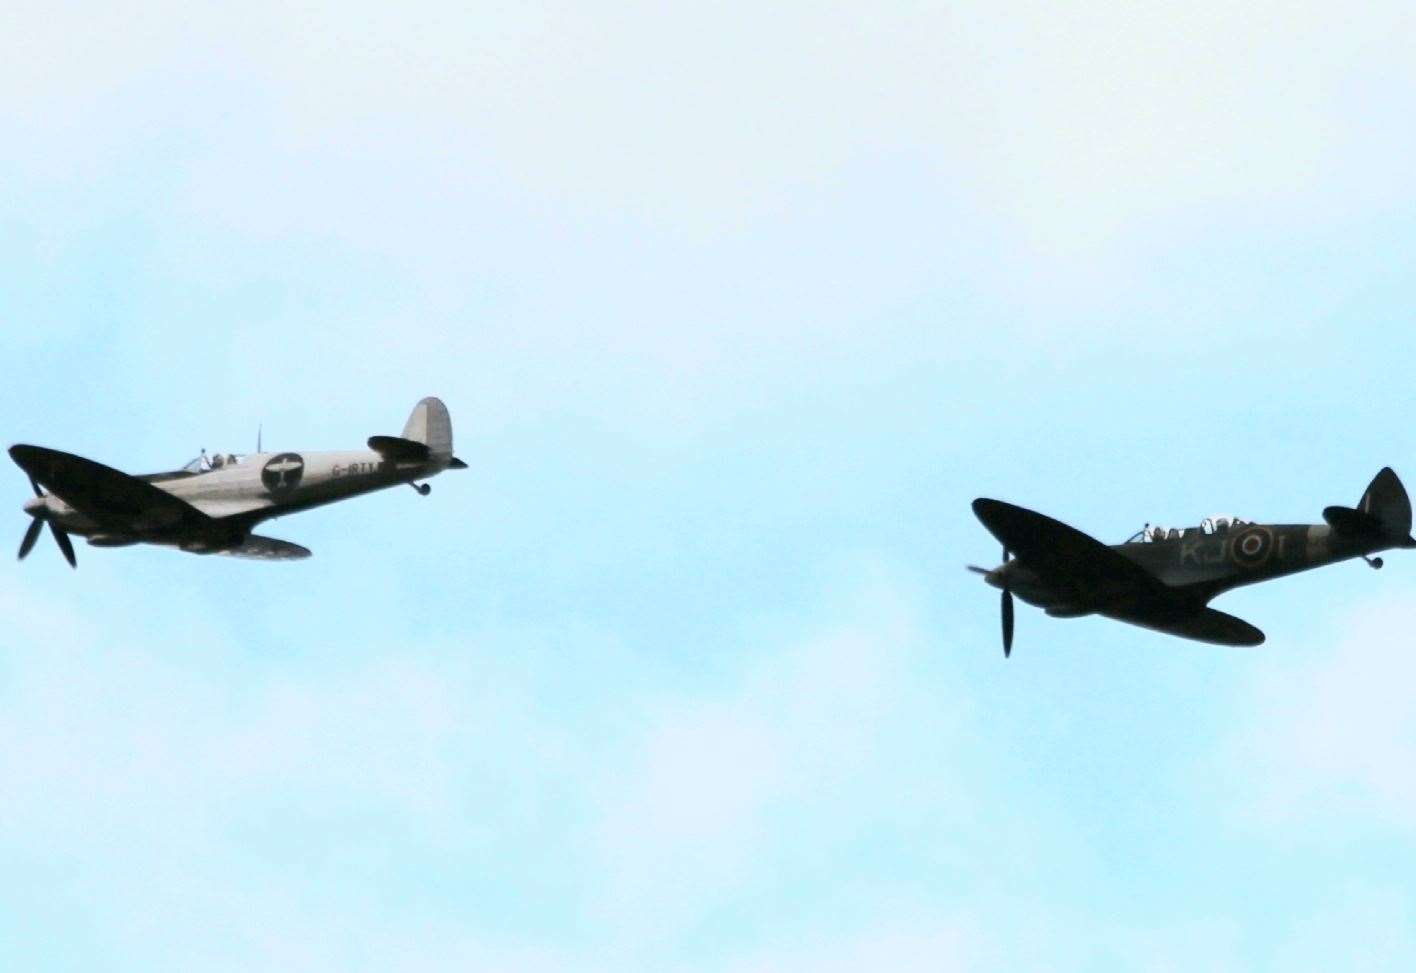 The pair of Spitfires in the air above Aviemore.